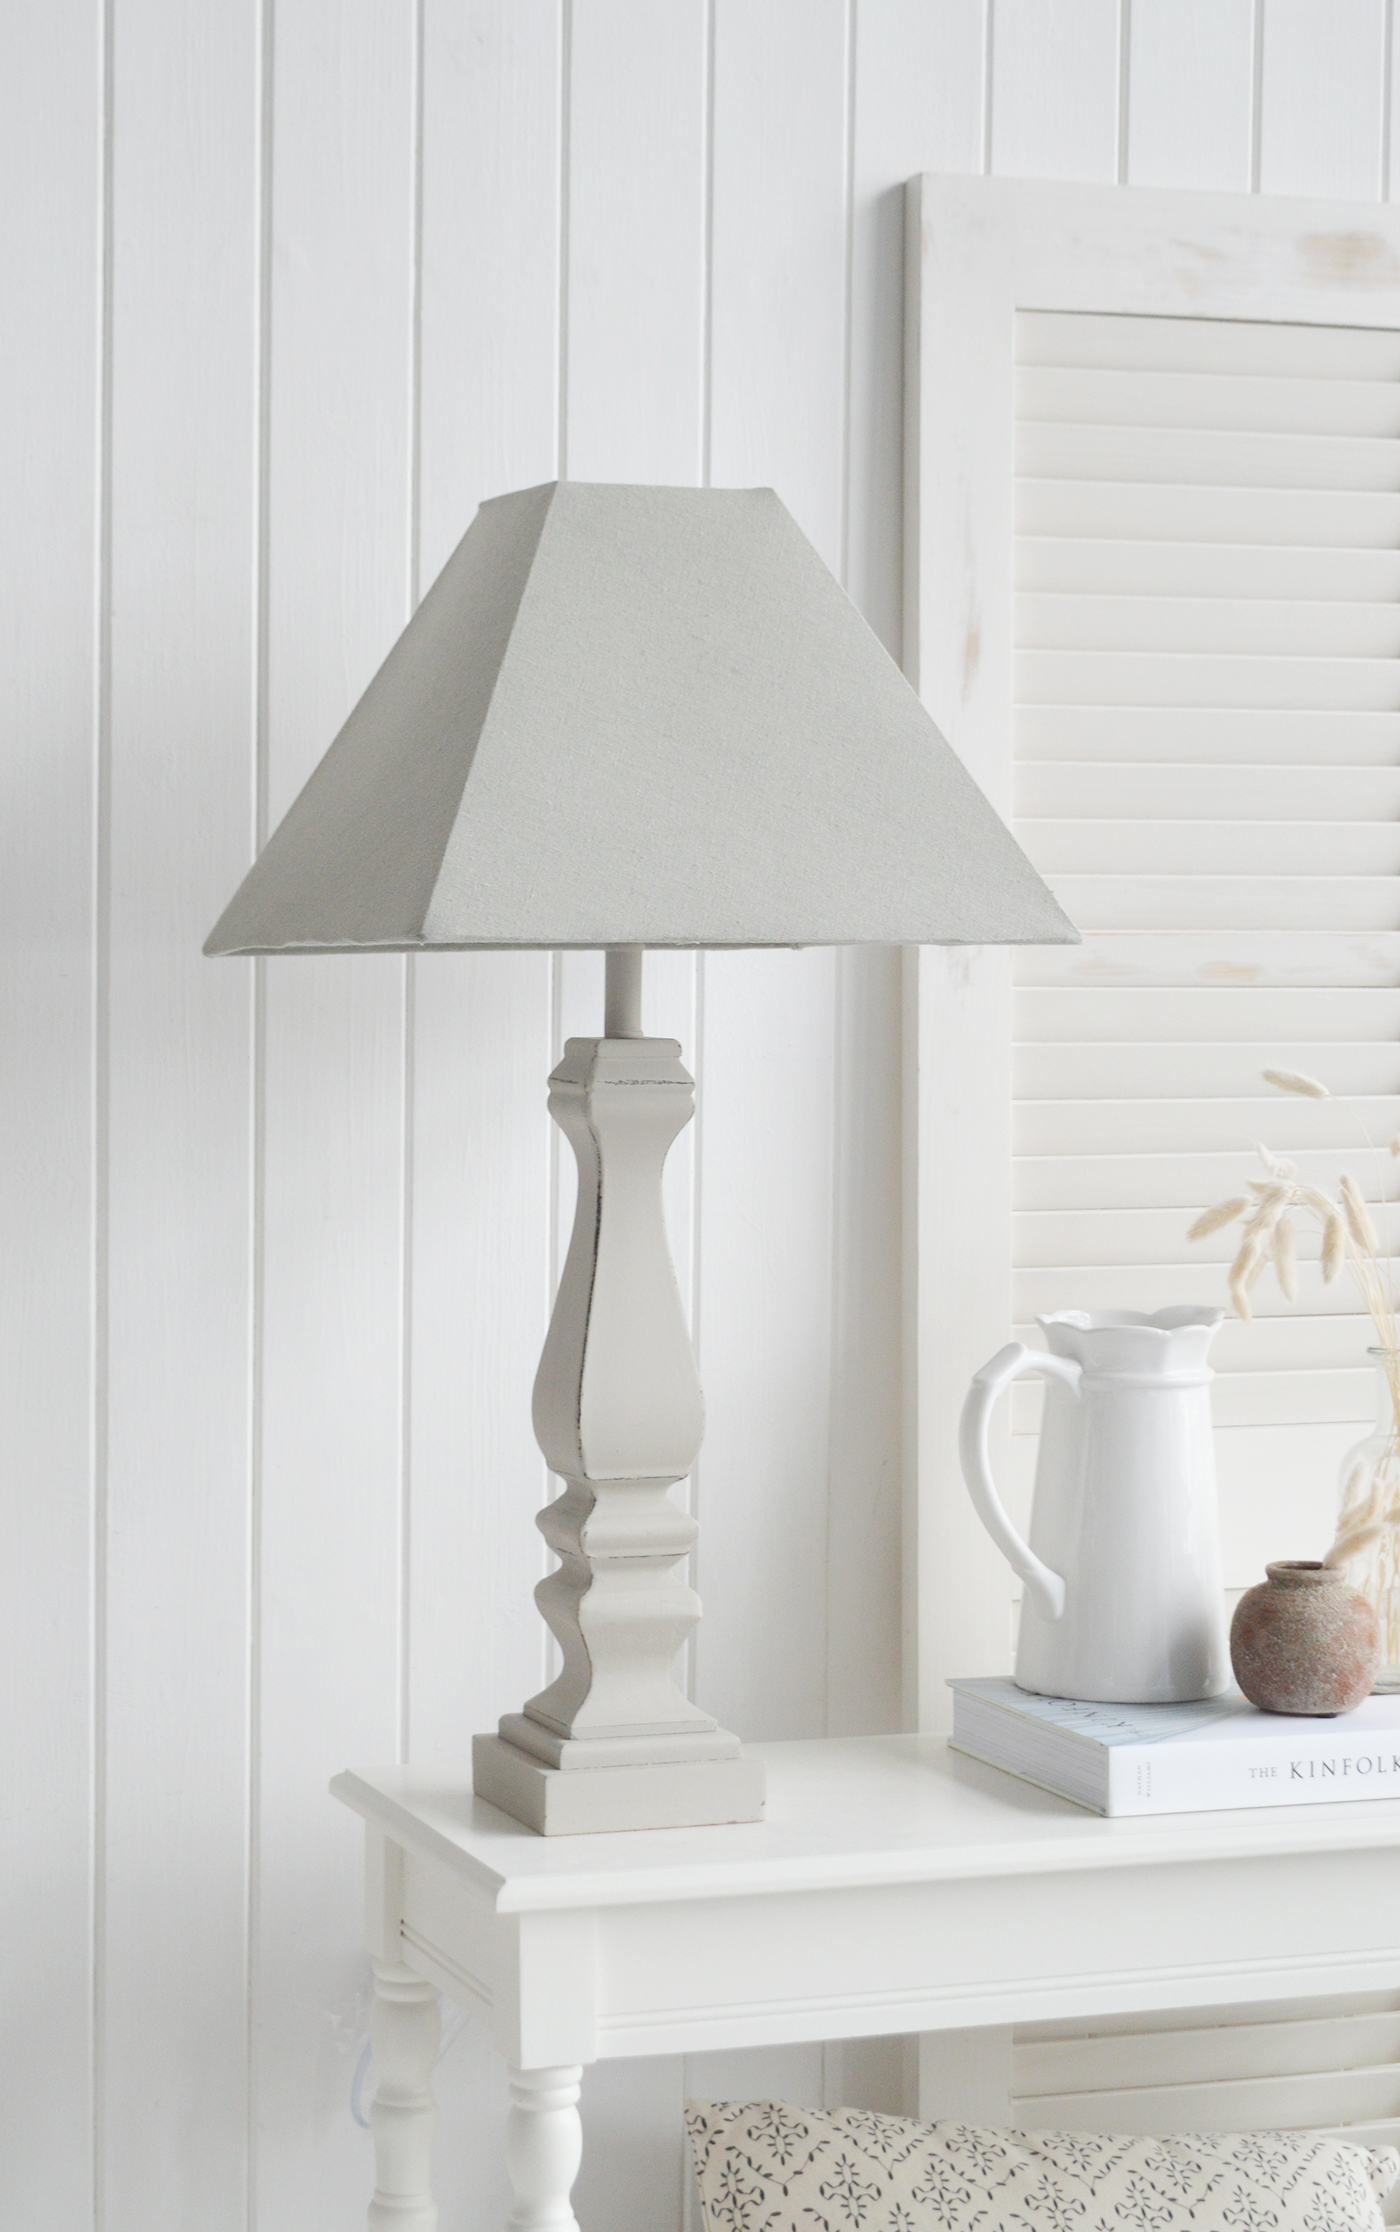 Hamptons Tall Soft Grey Table Lamp - New England Style Lamps from The White Lighthouse Furniture. Home Interiors and accessories for country, coastal, Modern Farmhouse and city New England Styled homes